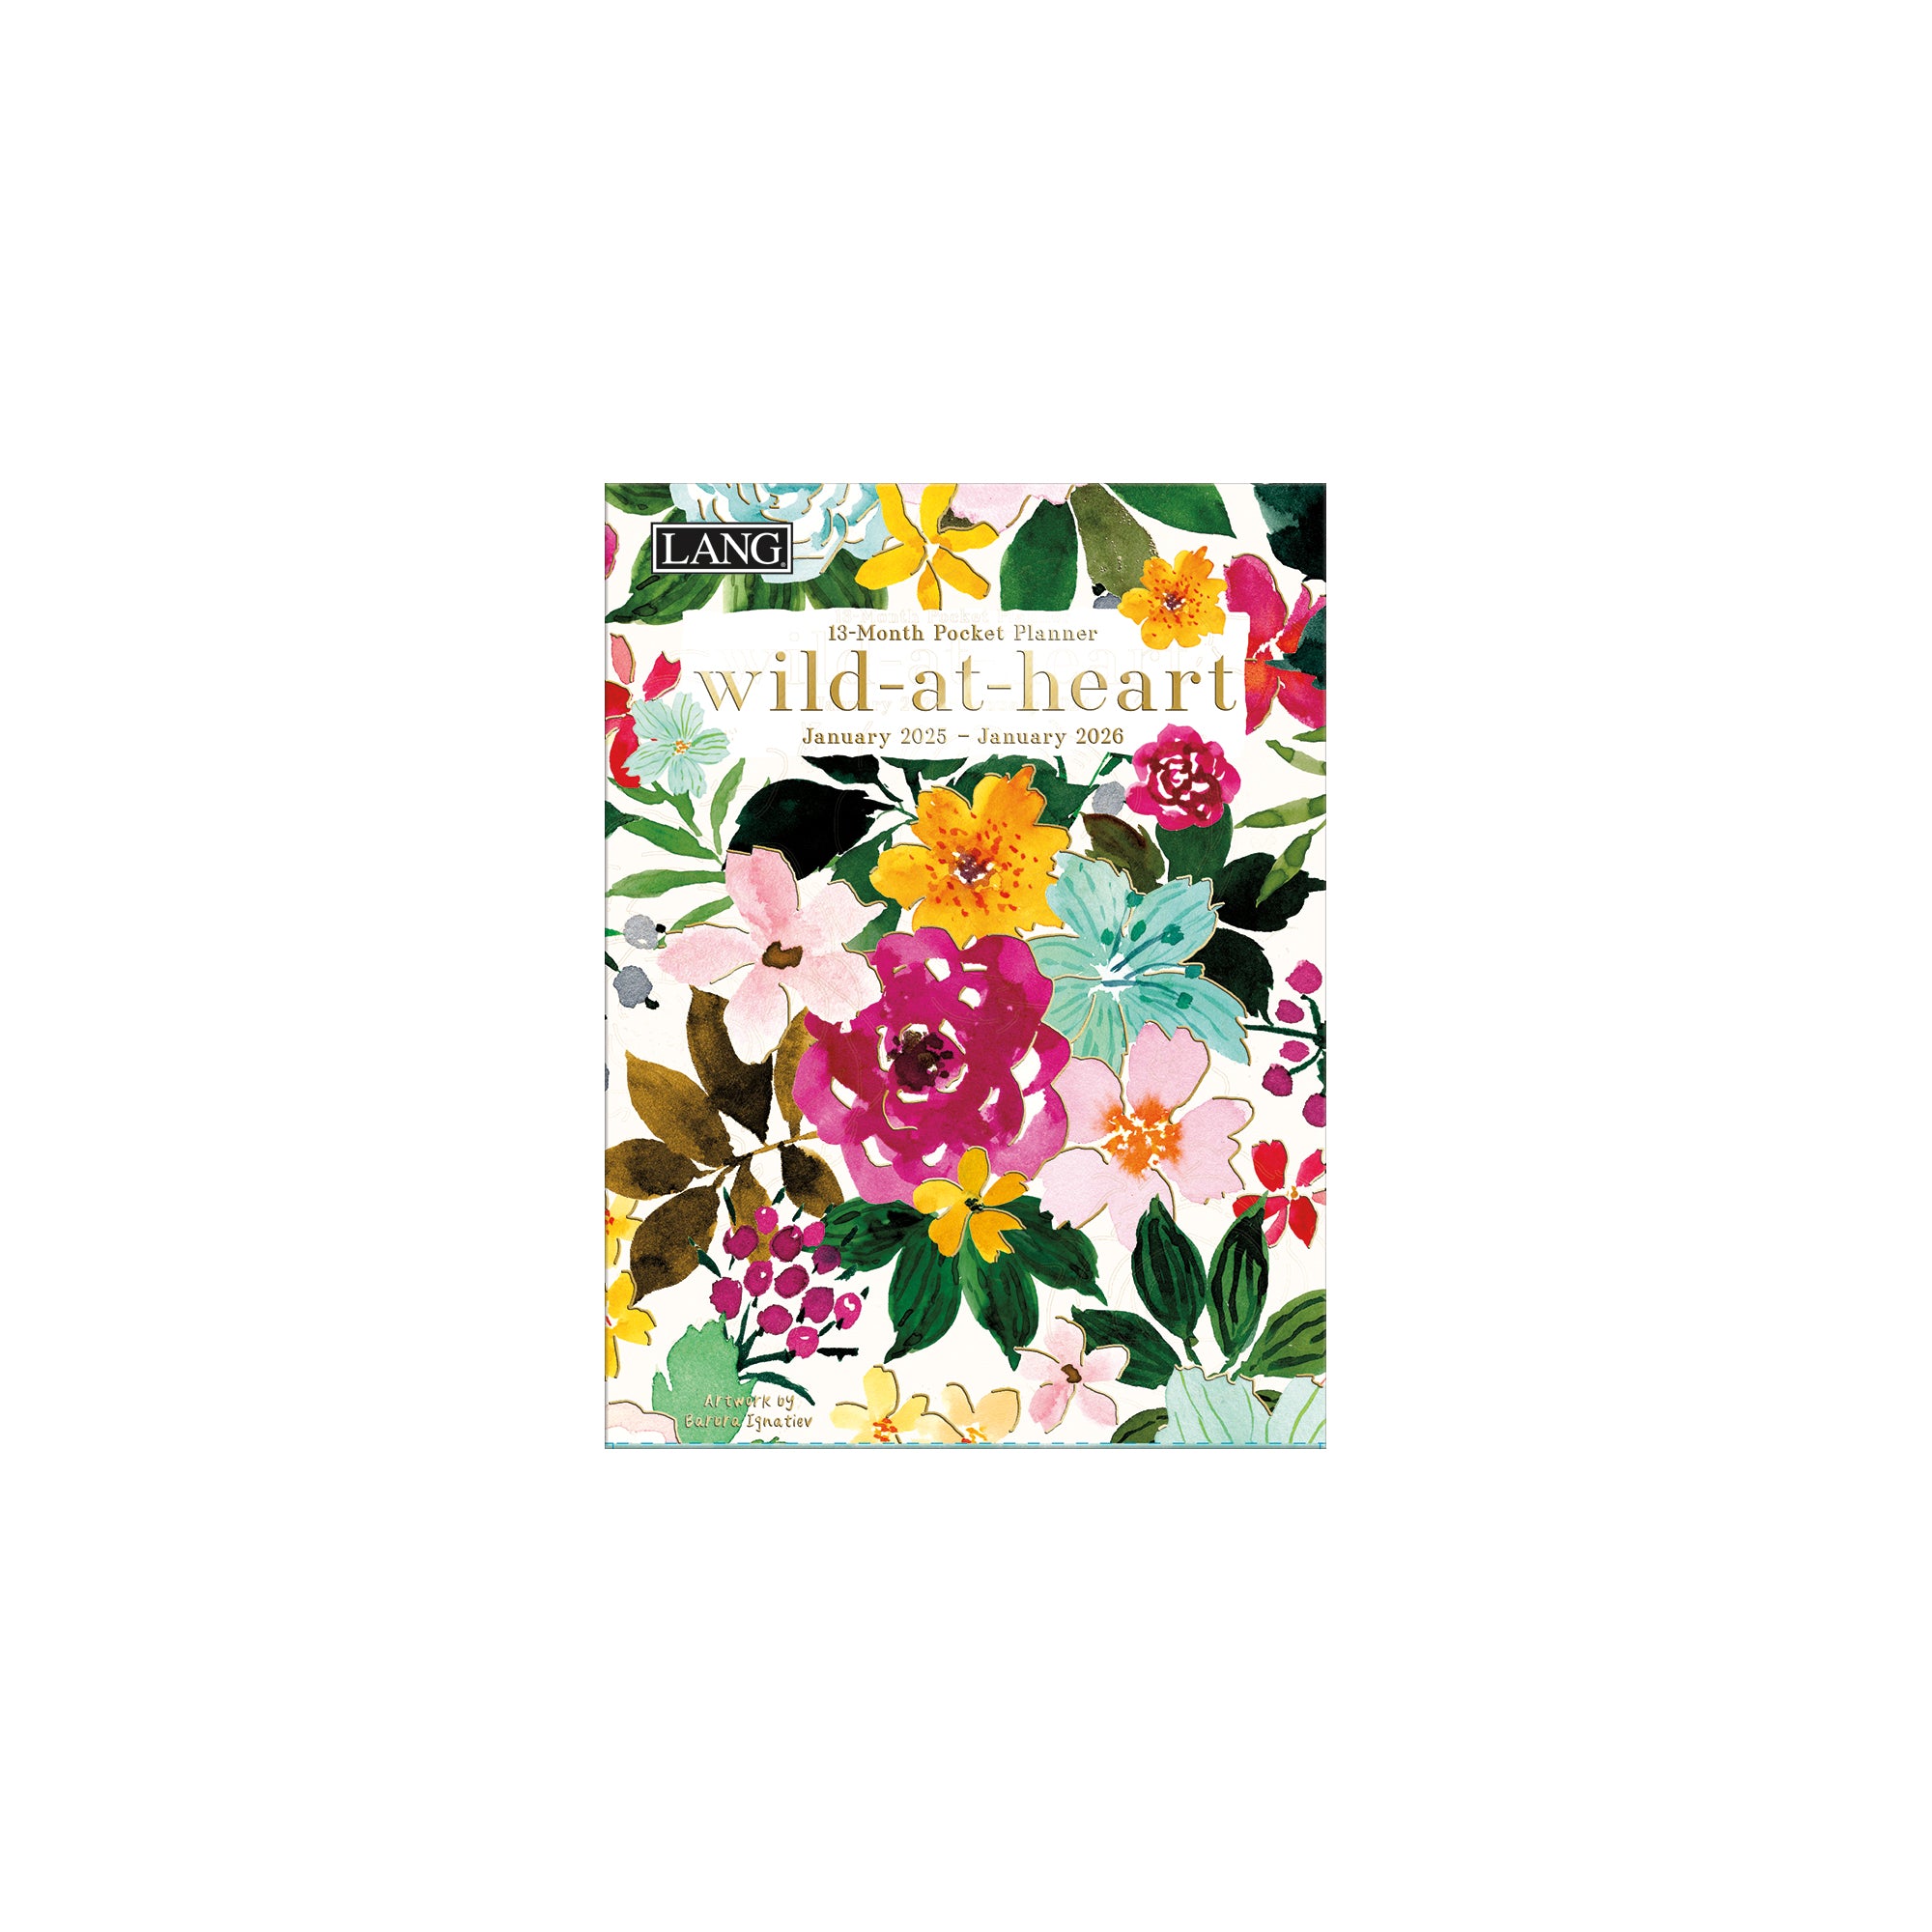 2025 Wild At Heart - LANG 13 Month Pocket Diary/Planner